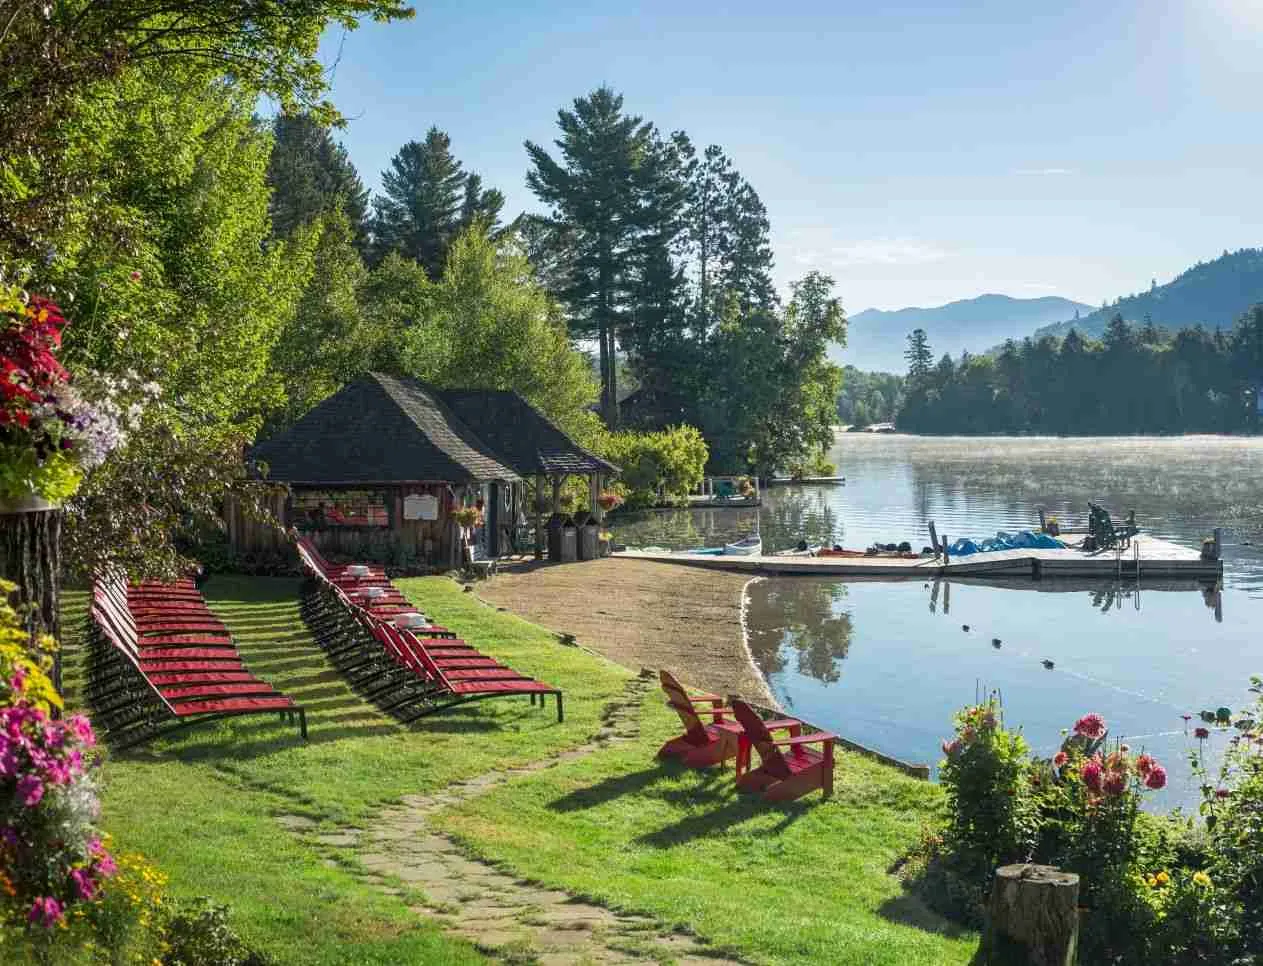 Mirror Lake Inn's private beach with lounge beach chairs, a cabin, and a dock.